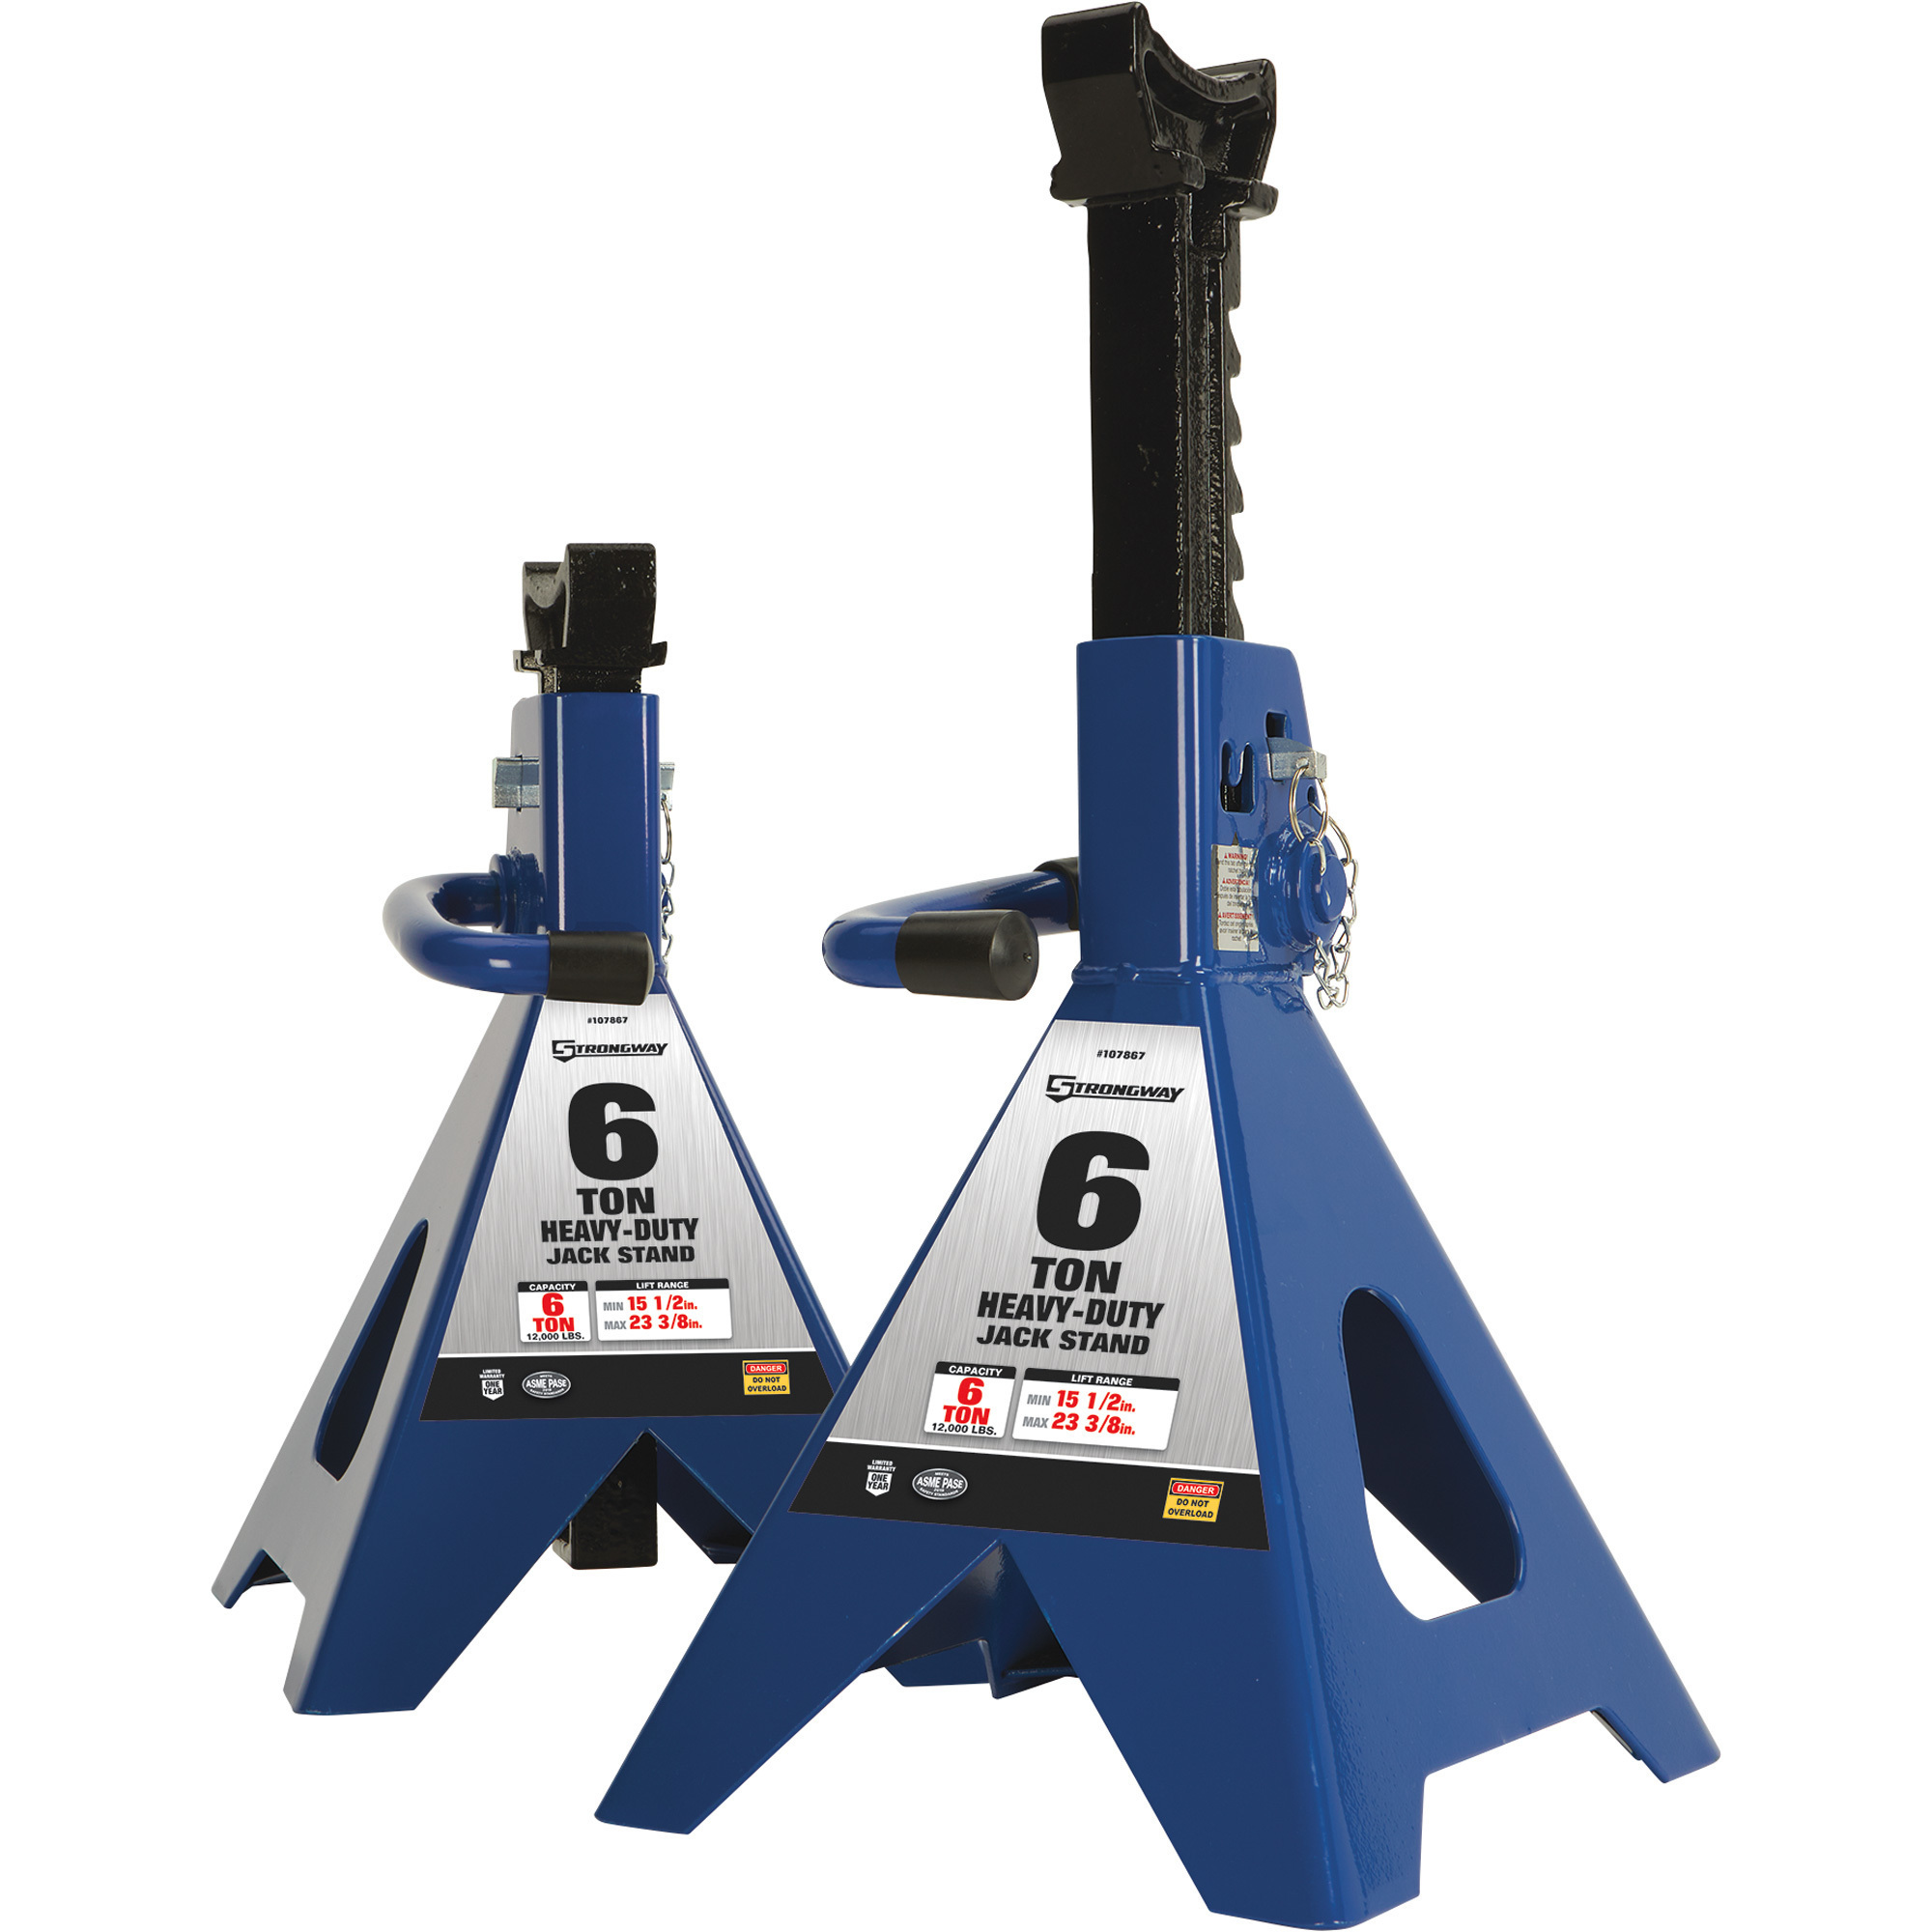 Strongway Double-Locking 6-Ton Jack Stands â 12,000-Lb. Capacity, Pair, Model NT46002A